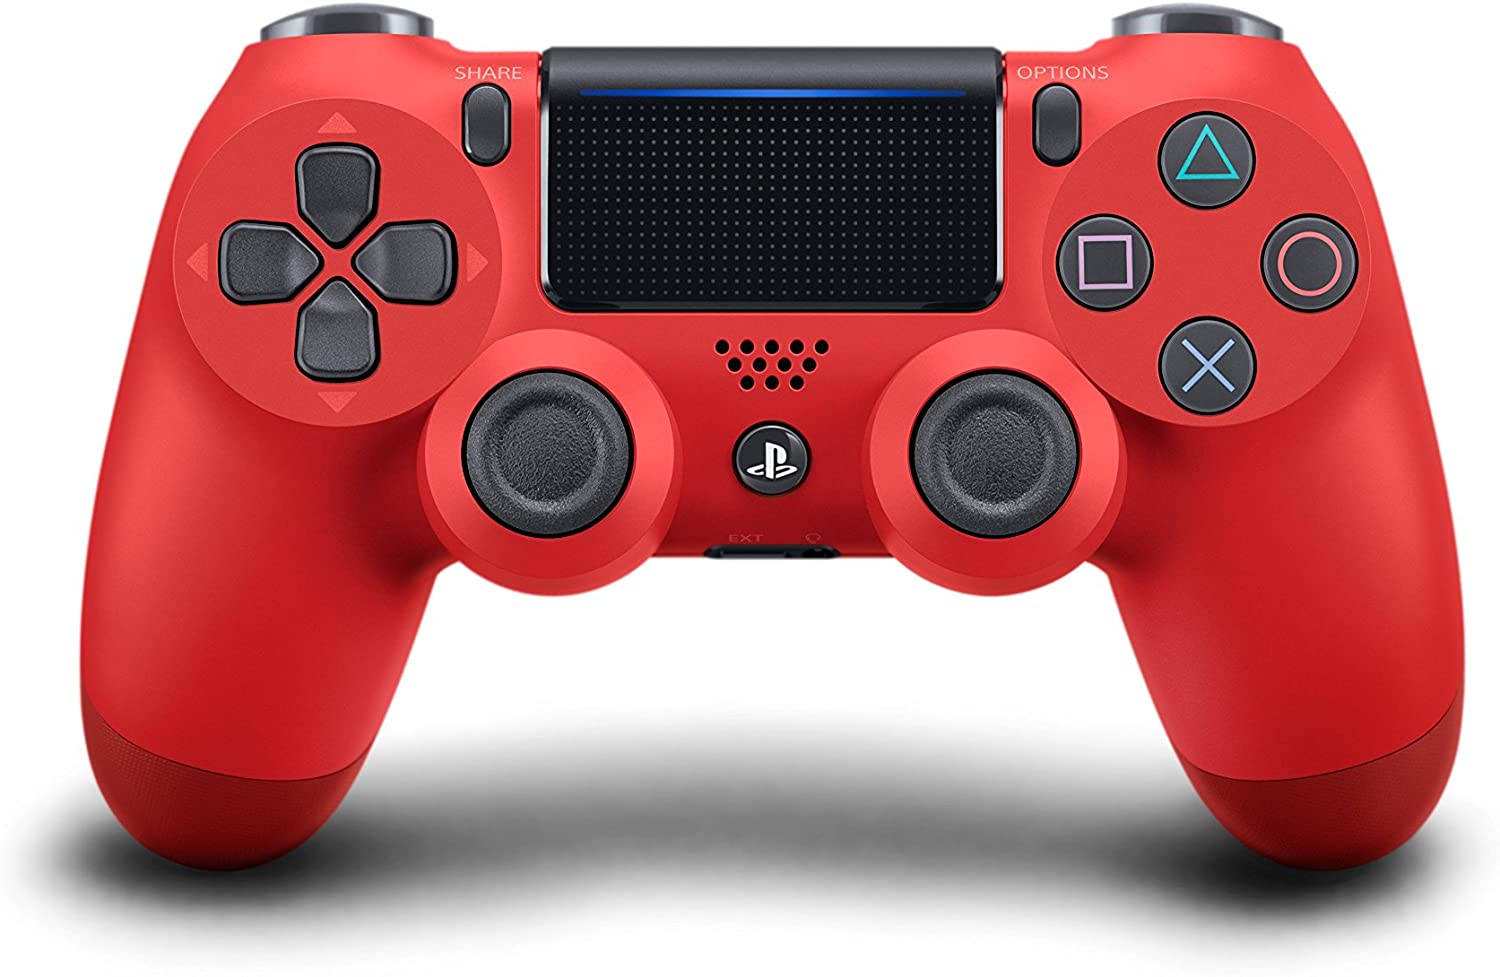 SONY DualShock 4 Magma Red Controller - PlayStation 4 Magma Red Edition (LNC)